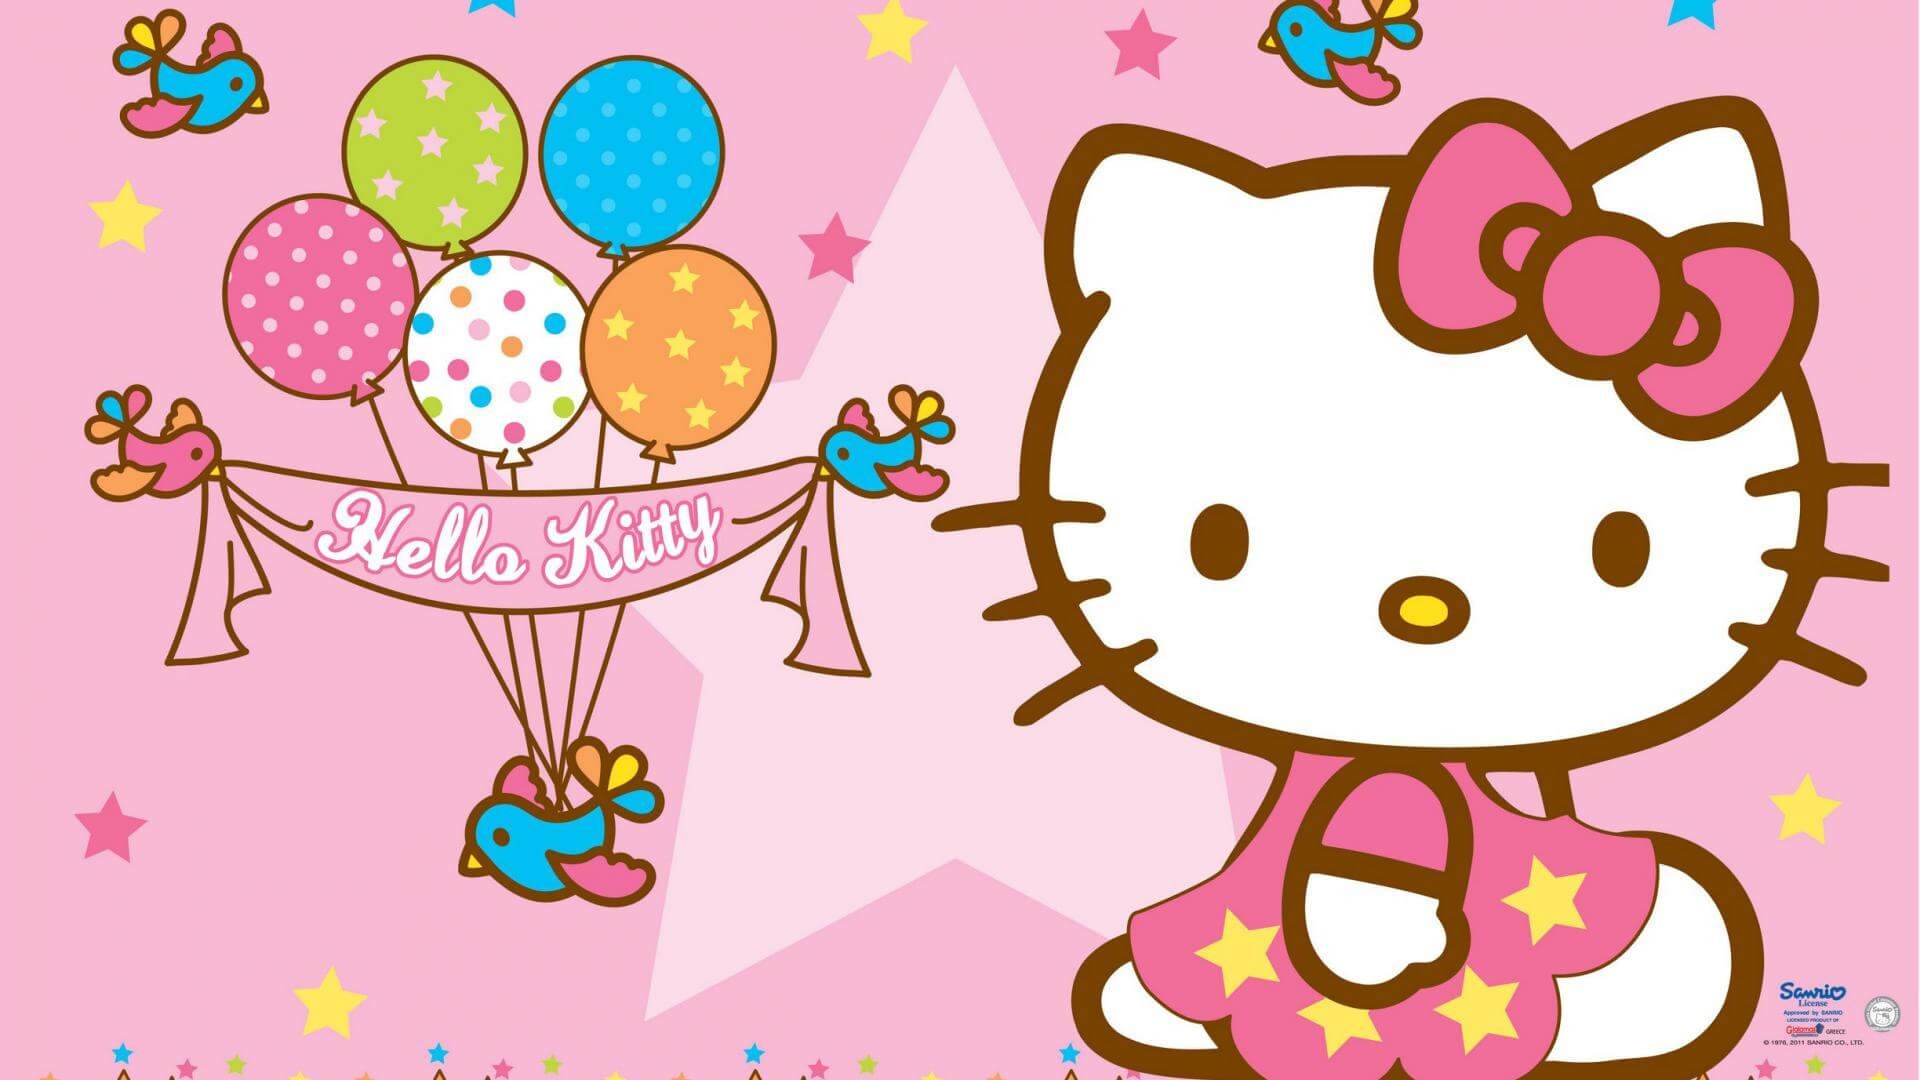 Sanrio Hello Kitty Background Wallpaper HD with image resolution 1920x1080 pixel. You can make this wallpaper for your Desktop Computer Backgrounds, Mac Wallpapers, Android Lock screen or iPhone Screensavers